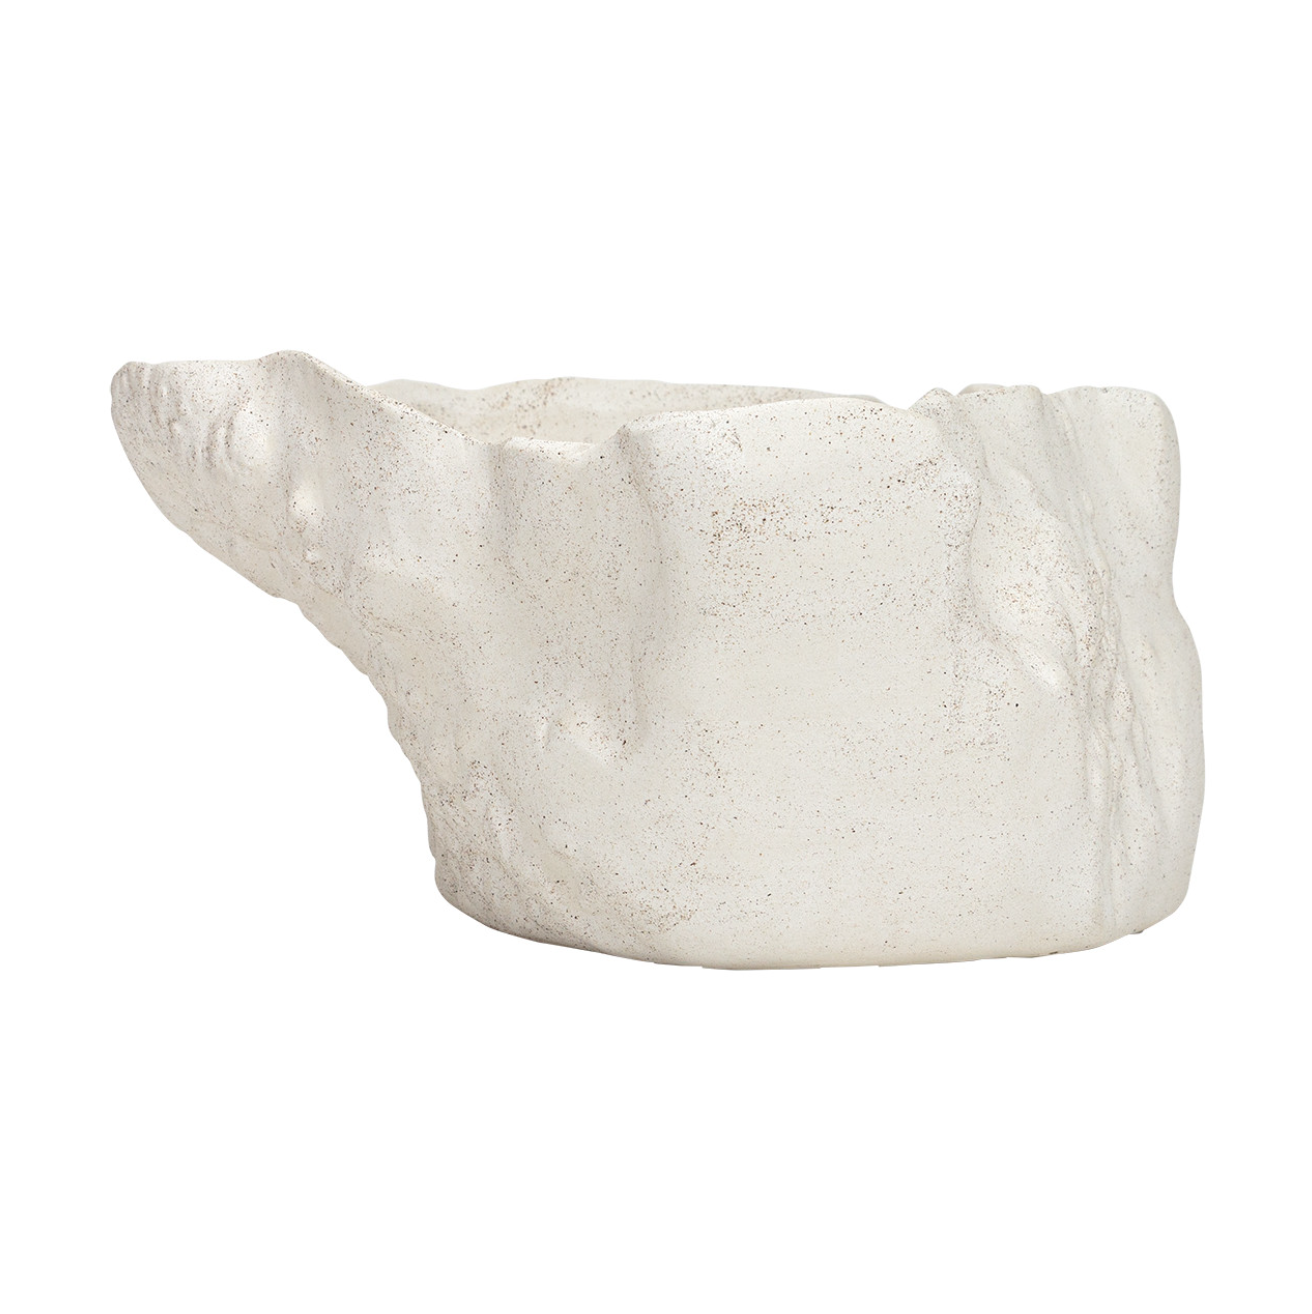 A white, rough-textured ceramic planter shaped like a lying pig, isolated on a white background, perfect for adding a touch of Scottsdale Arizona charm to your bungalow. The Import Collection Turner Bowl.